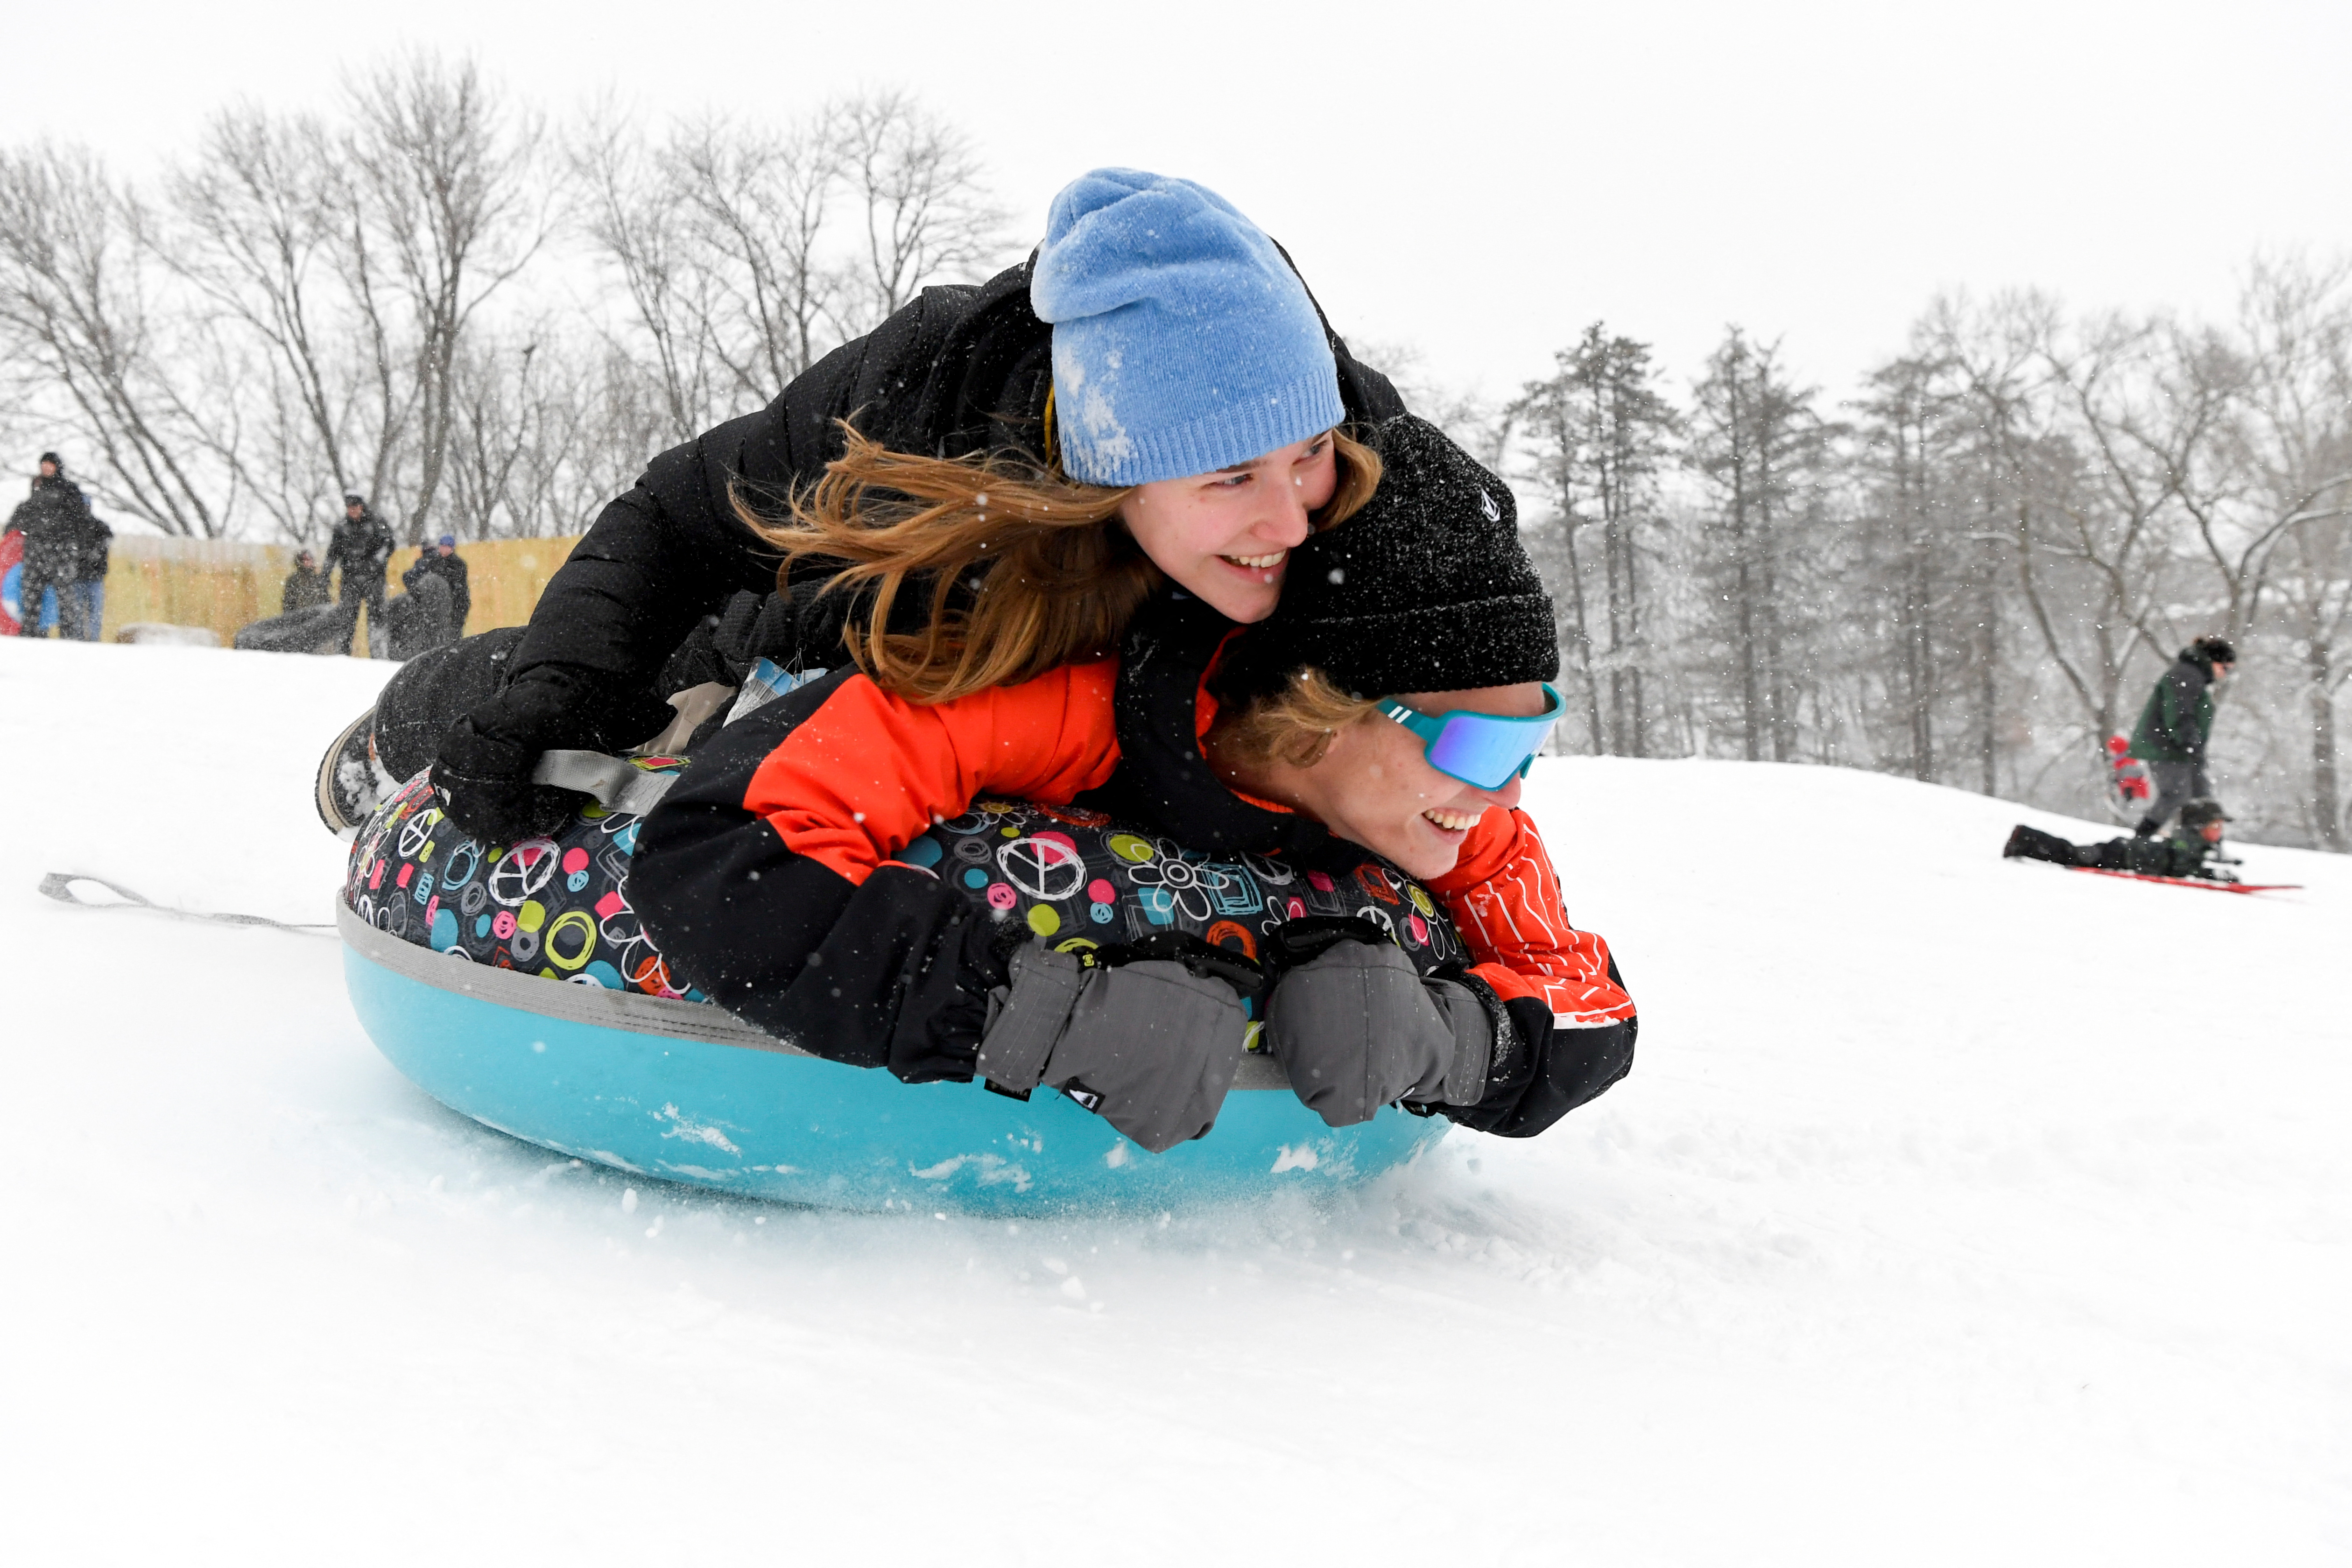 People sled during a snowstorm in Maumee, Ohio